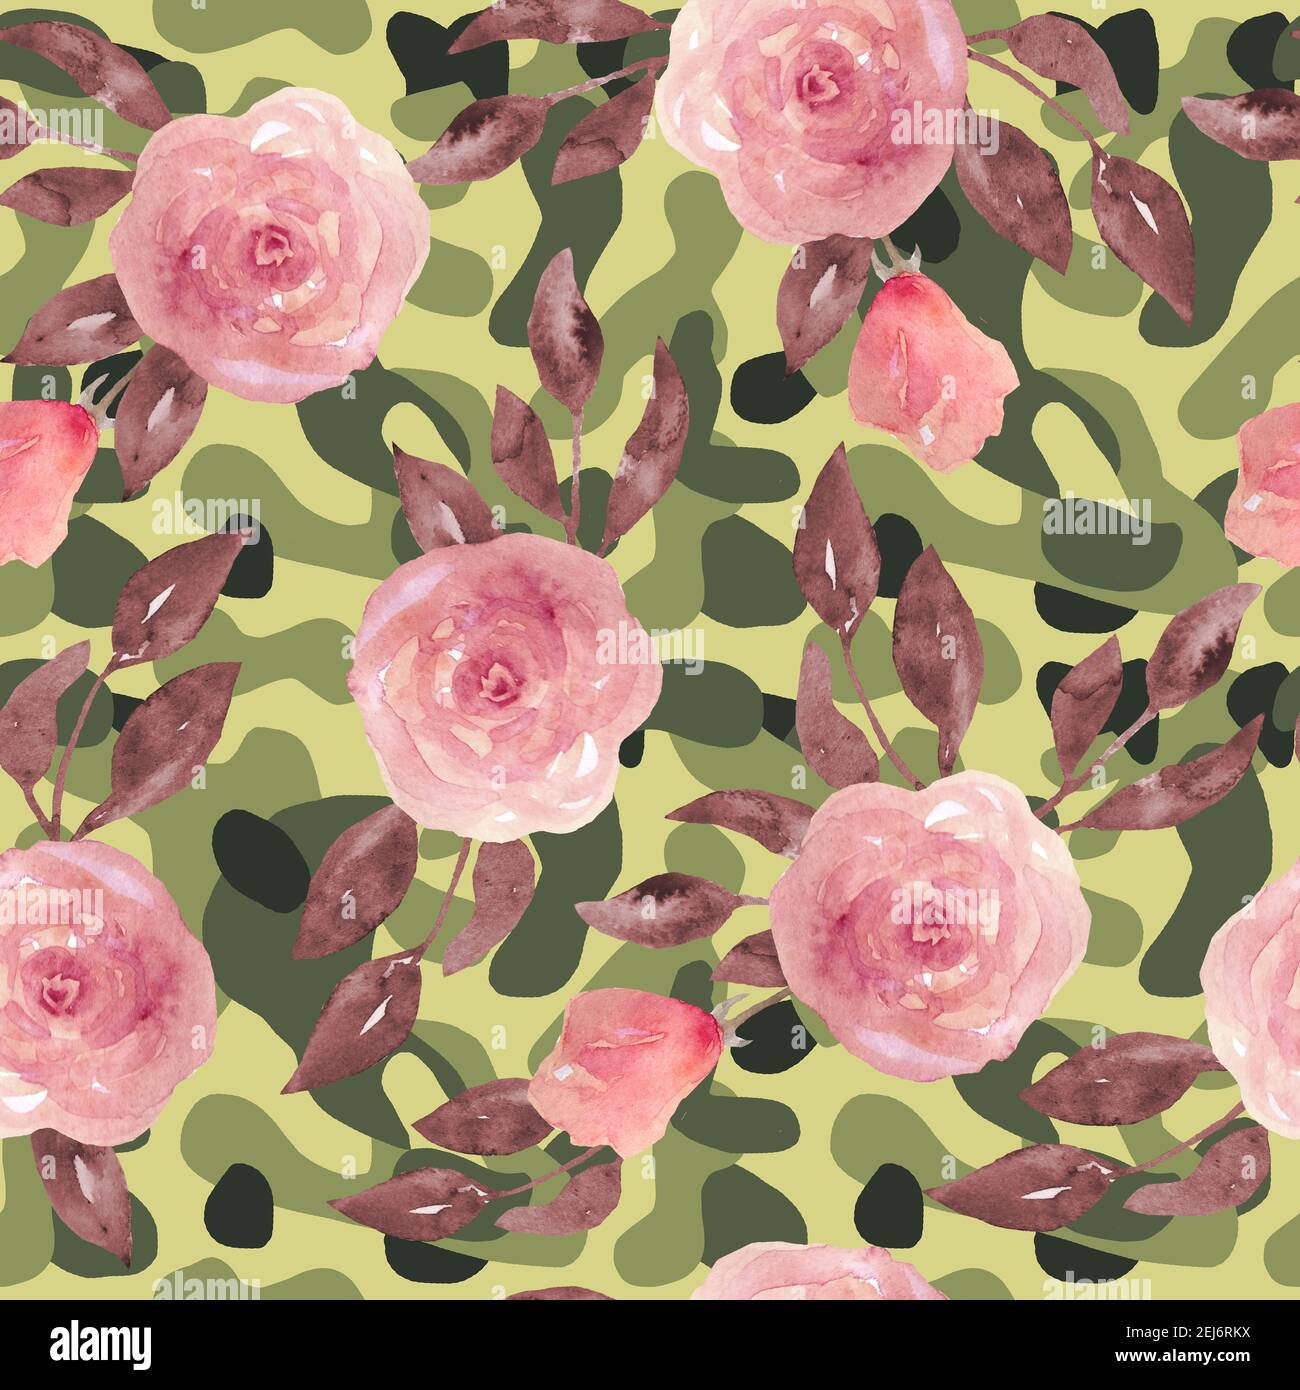 Floral camo camouflage seamless pattern with pink roses flowers. Military army design, textile for masking hiding hunting. Print for war soldiers in jungle desert forest outdoors, trendy style texture Stock Photo